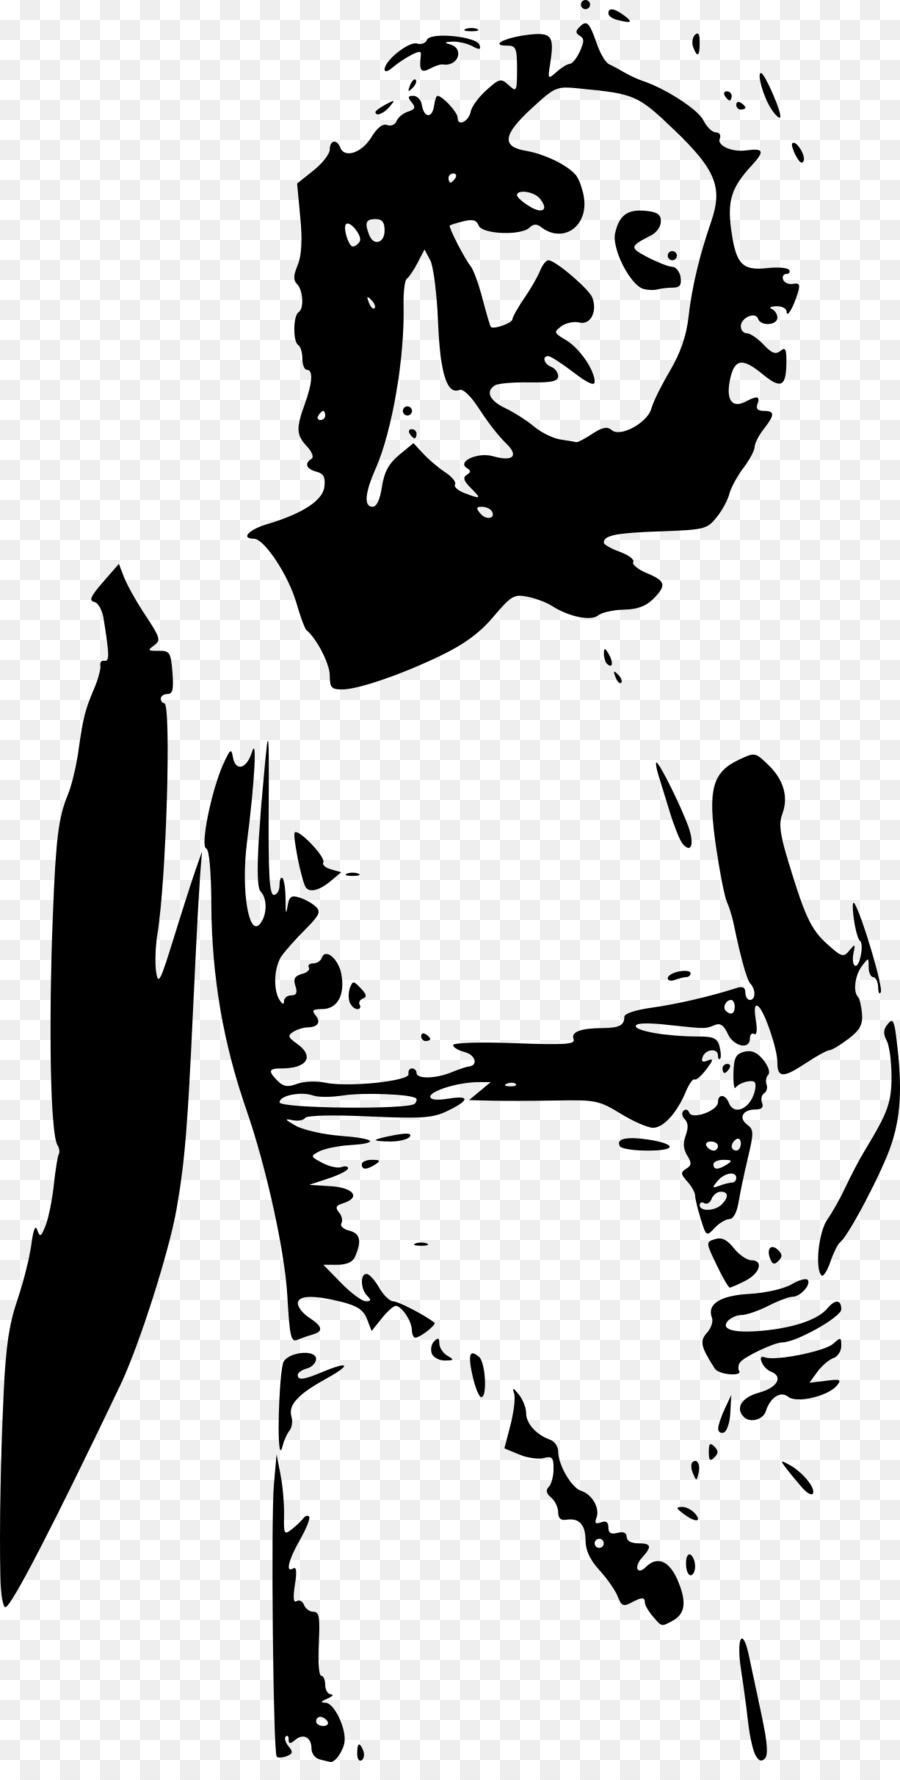 The Taming of the Shrew Silhouette Queen of Hearts Clip art - hand-painted arab woman png download - 1226*2400 - Free Transparent Taming Of The Shrew png Download.